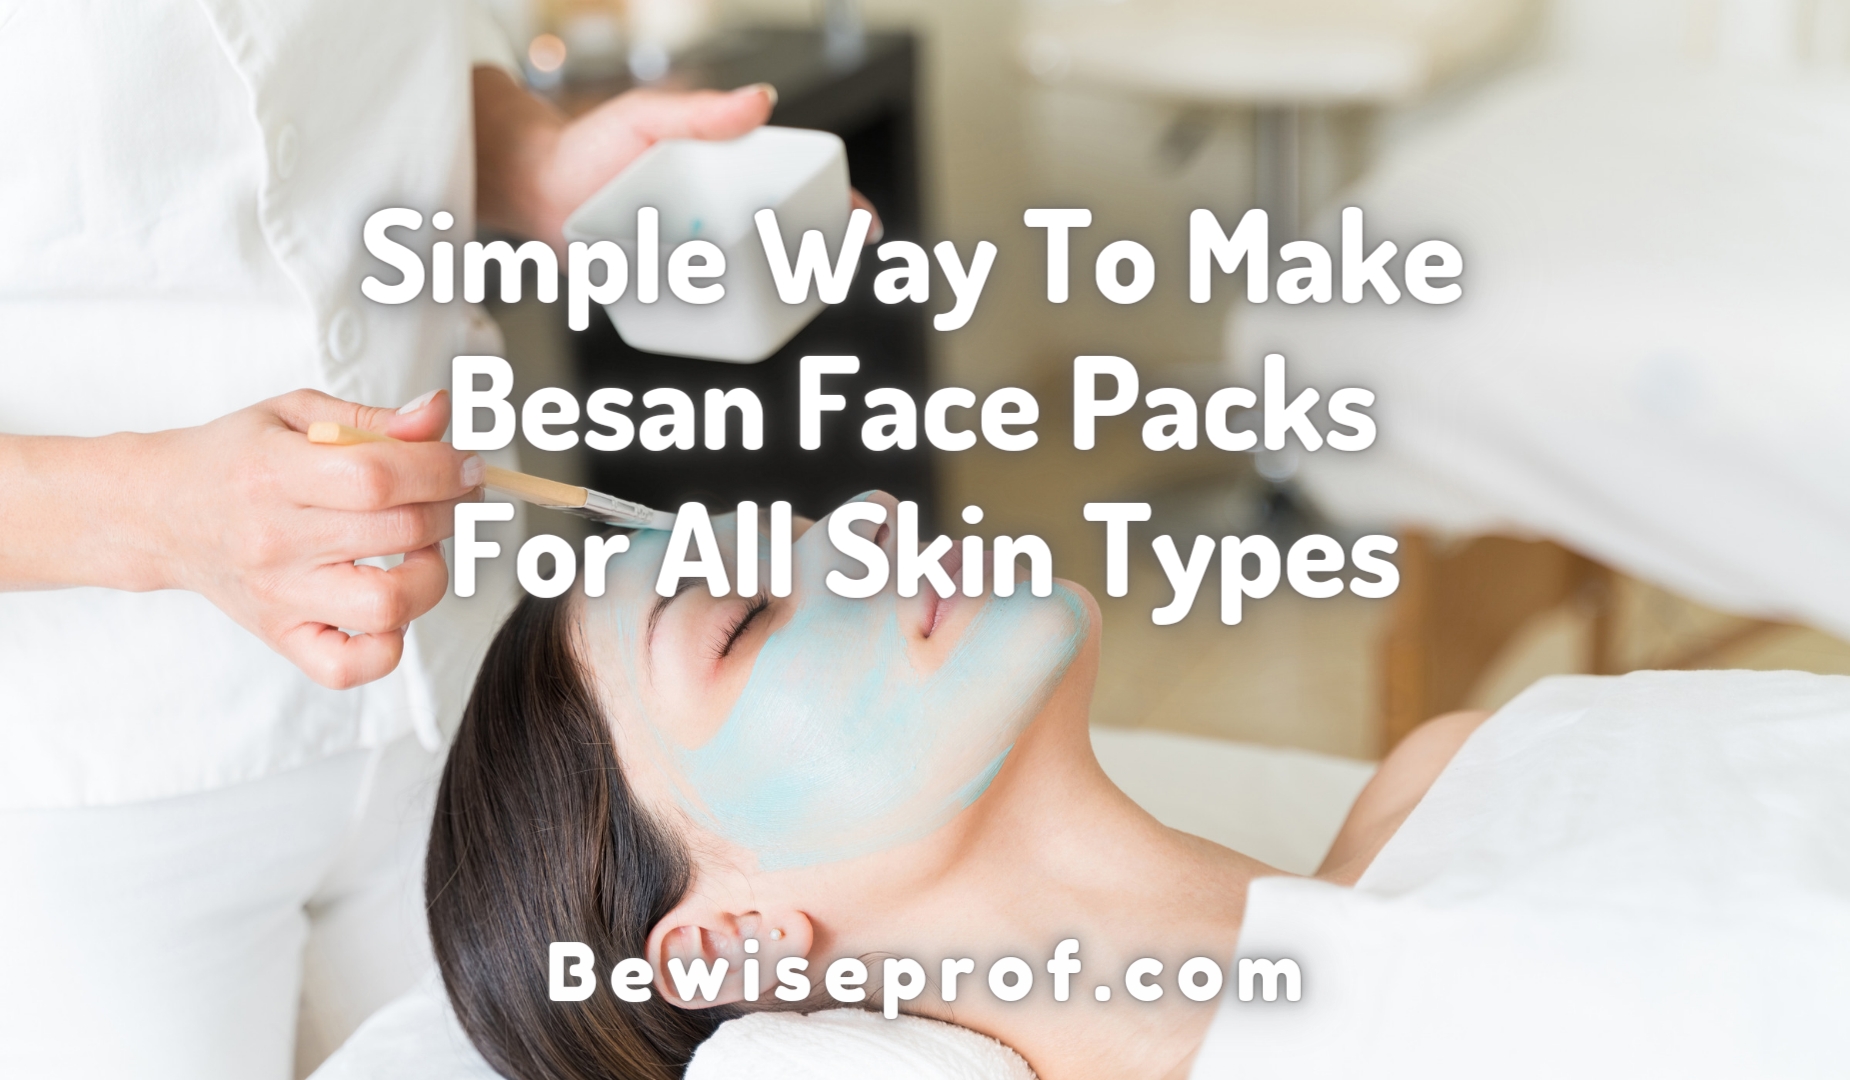 Simple Way To Make Besan Face Packs For All Skin Types